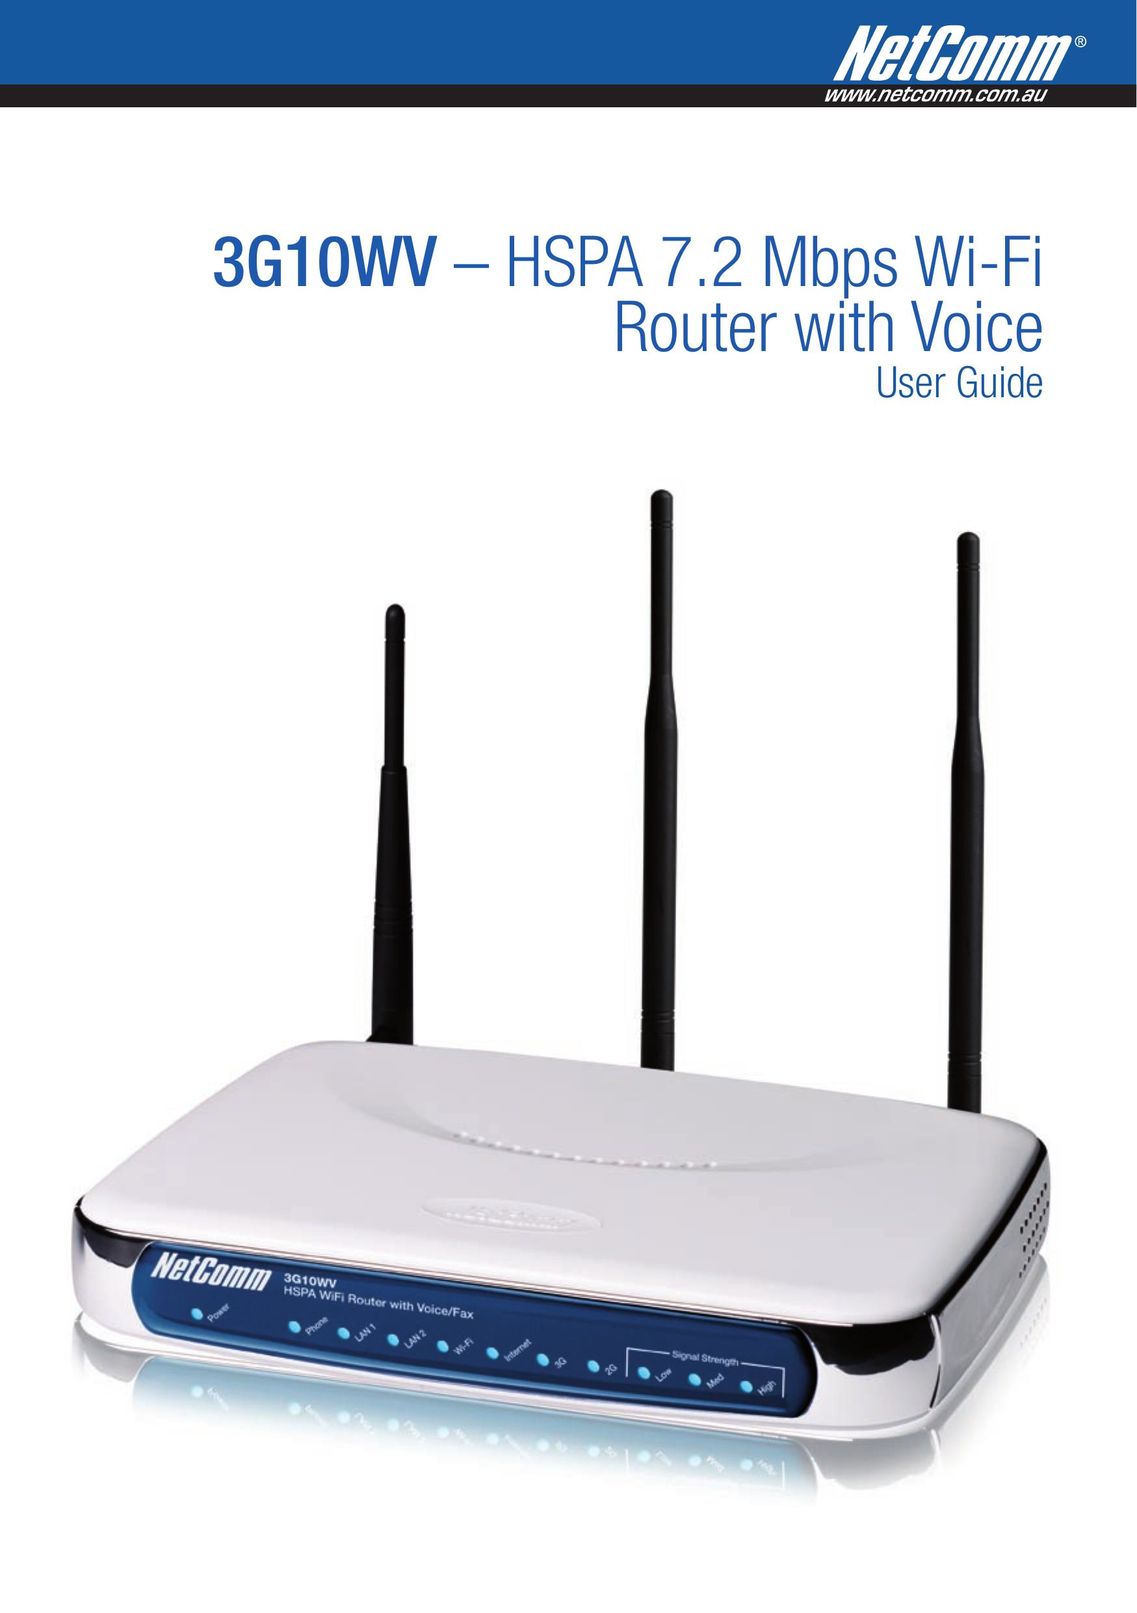 NordicTrack 3G10WV Network Router User Manual